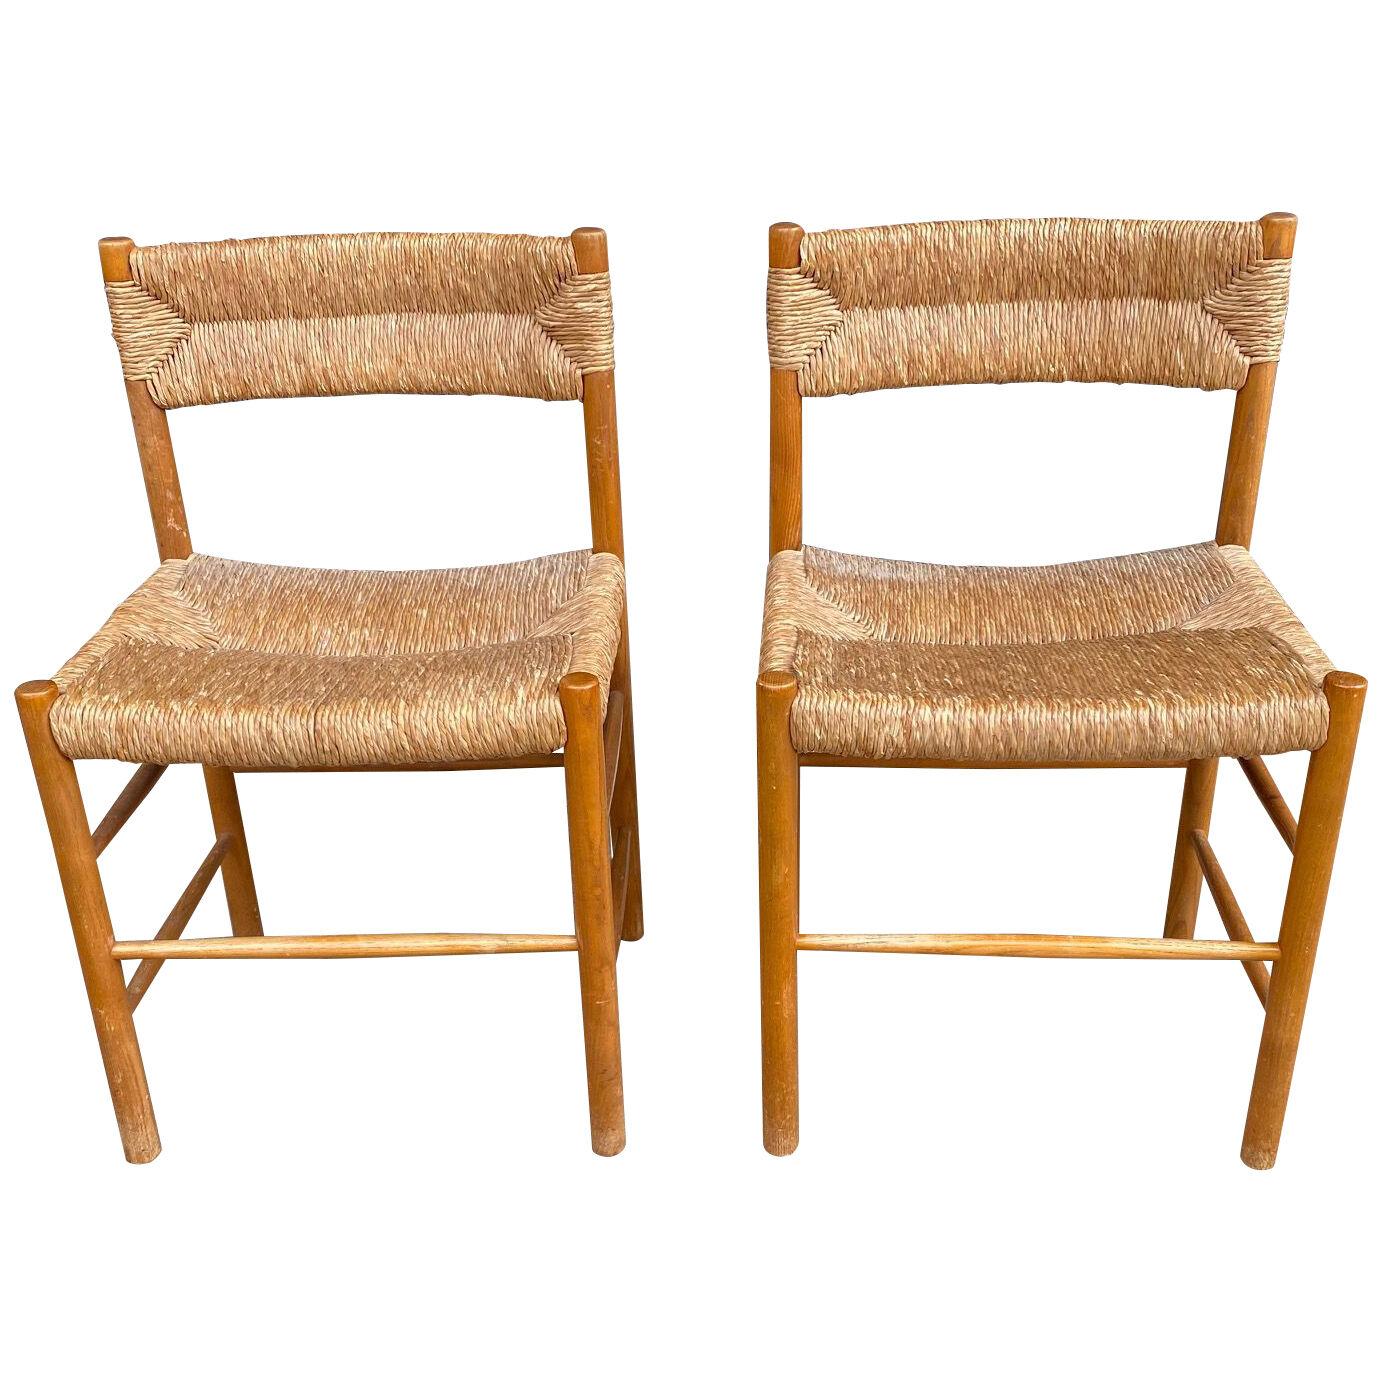 Pair of "Dordogne" Charlotte Perriand Chairs